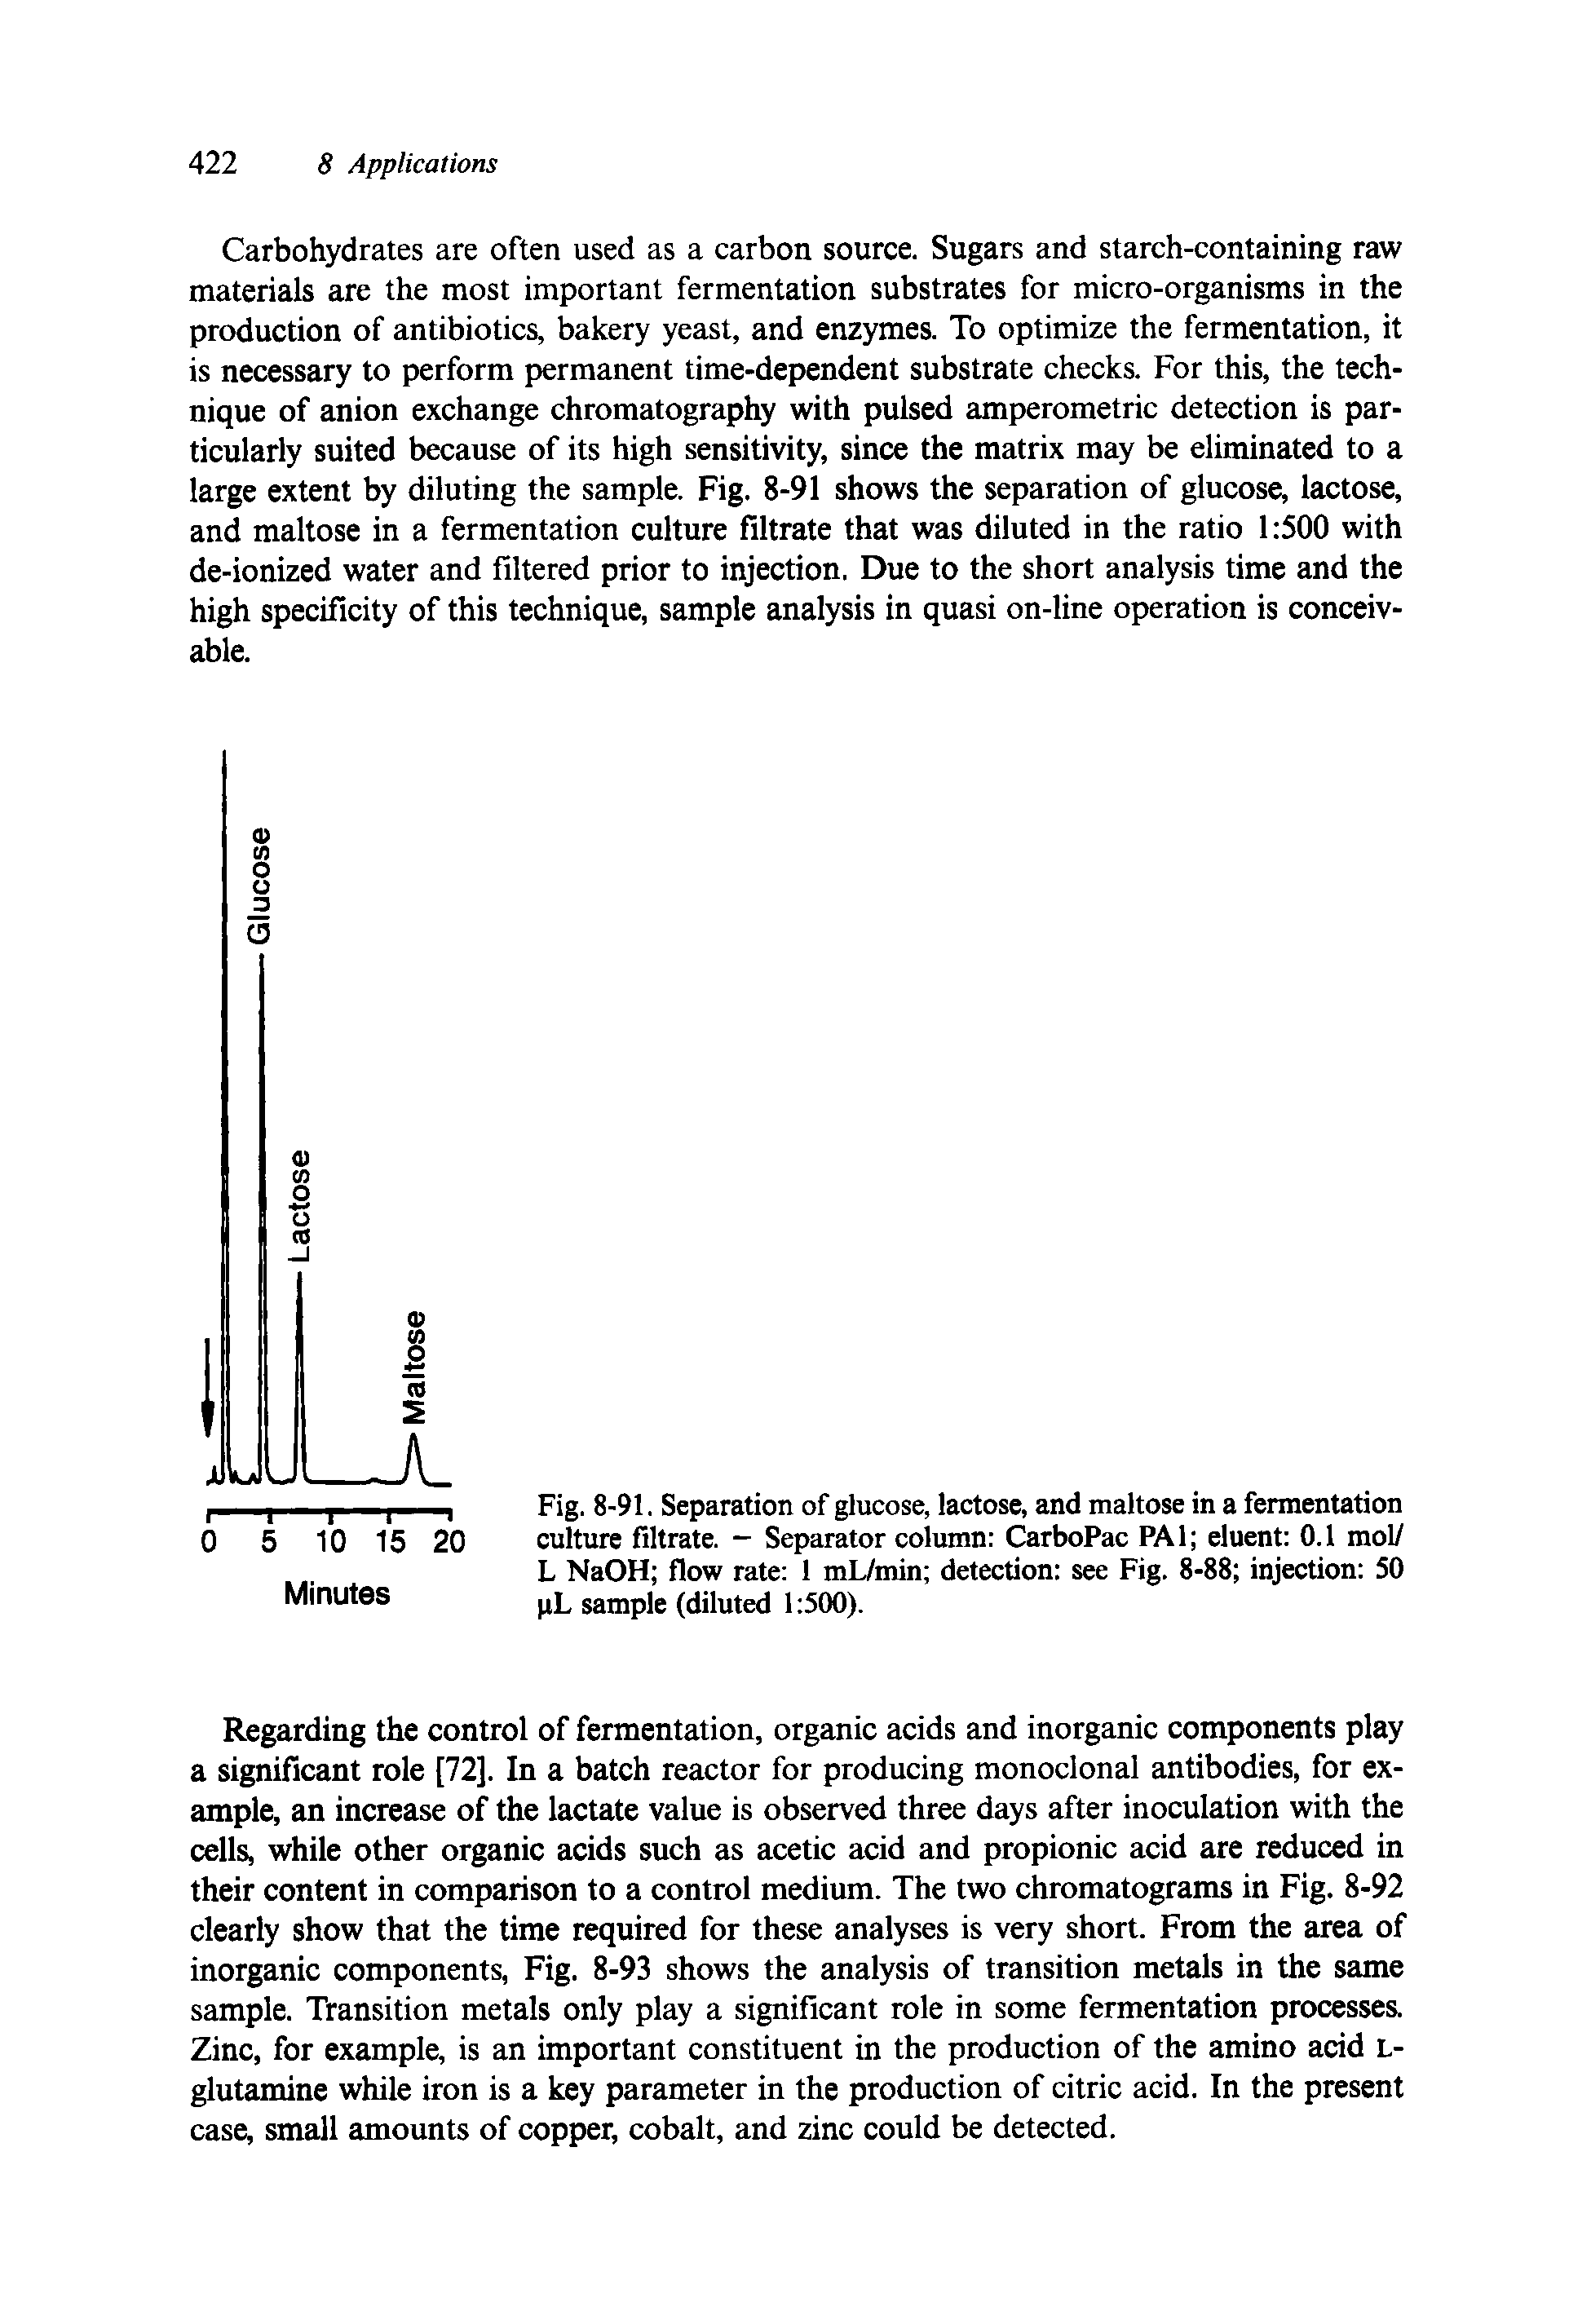 Fig. 8-91. Separation of glucose, lactose, and maltose in a fermentation culture filtrate. - Separator column CarboPac PA1 eluent 0.1 mol/ L NaOH flow rate 1 mL/min detection see Fig. 8-88 injection 50 pL sample (diluted 1 500).